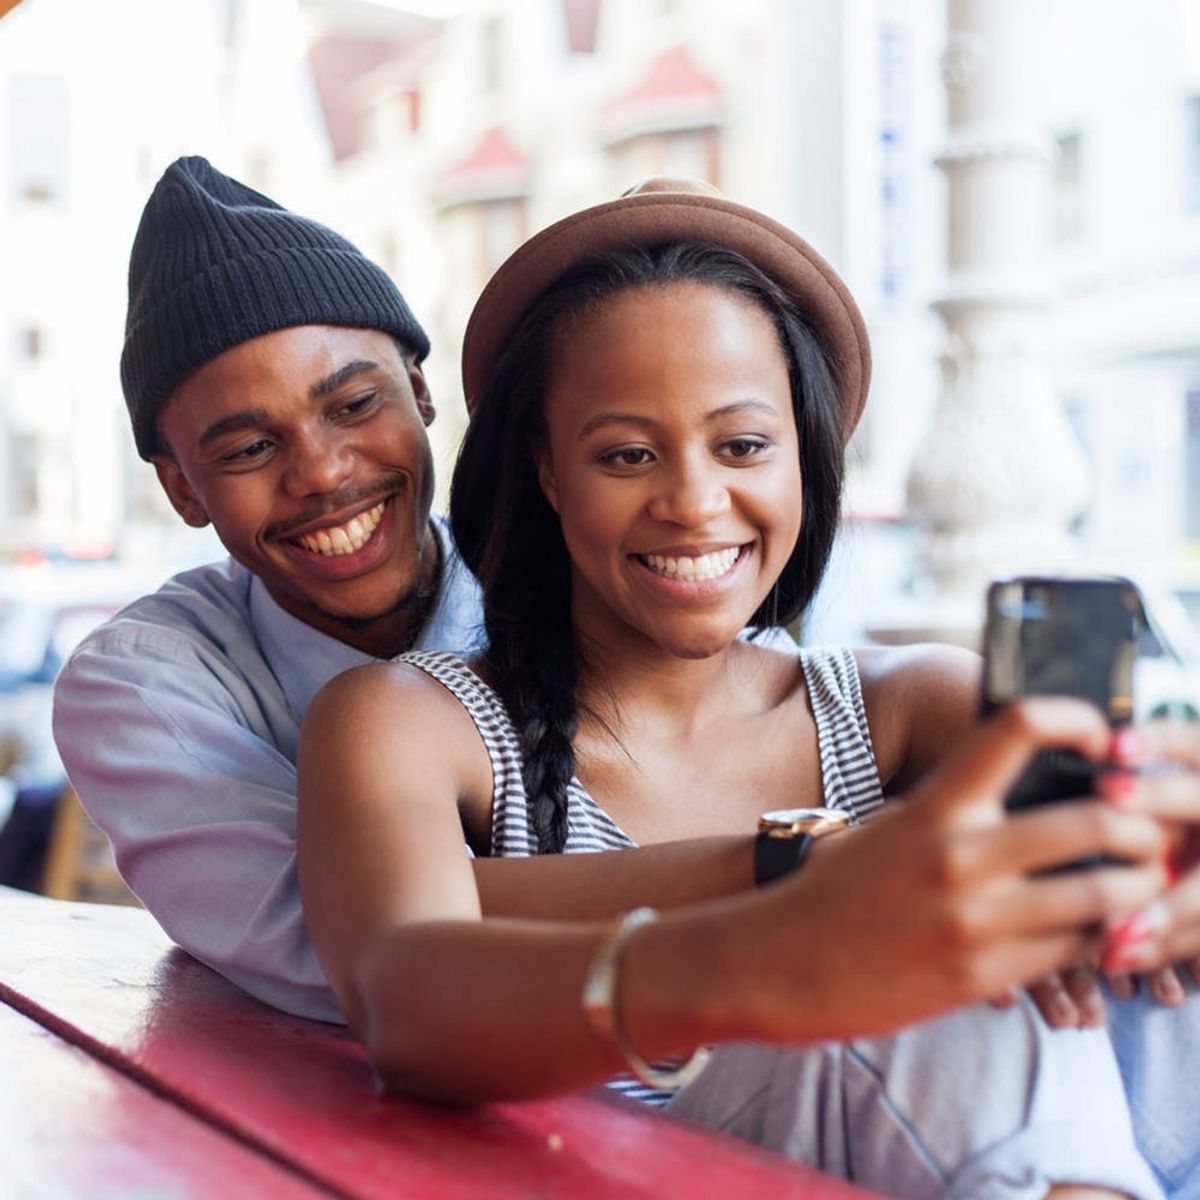 The 3 Best Ways to Share Your Relationship on Social Media